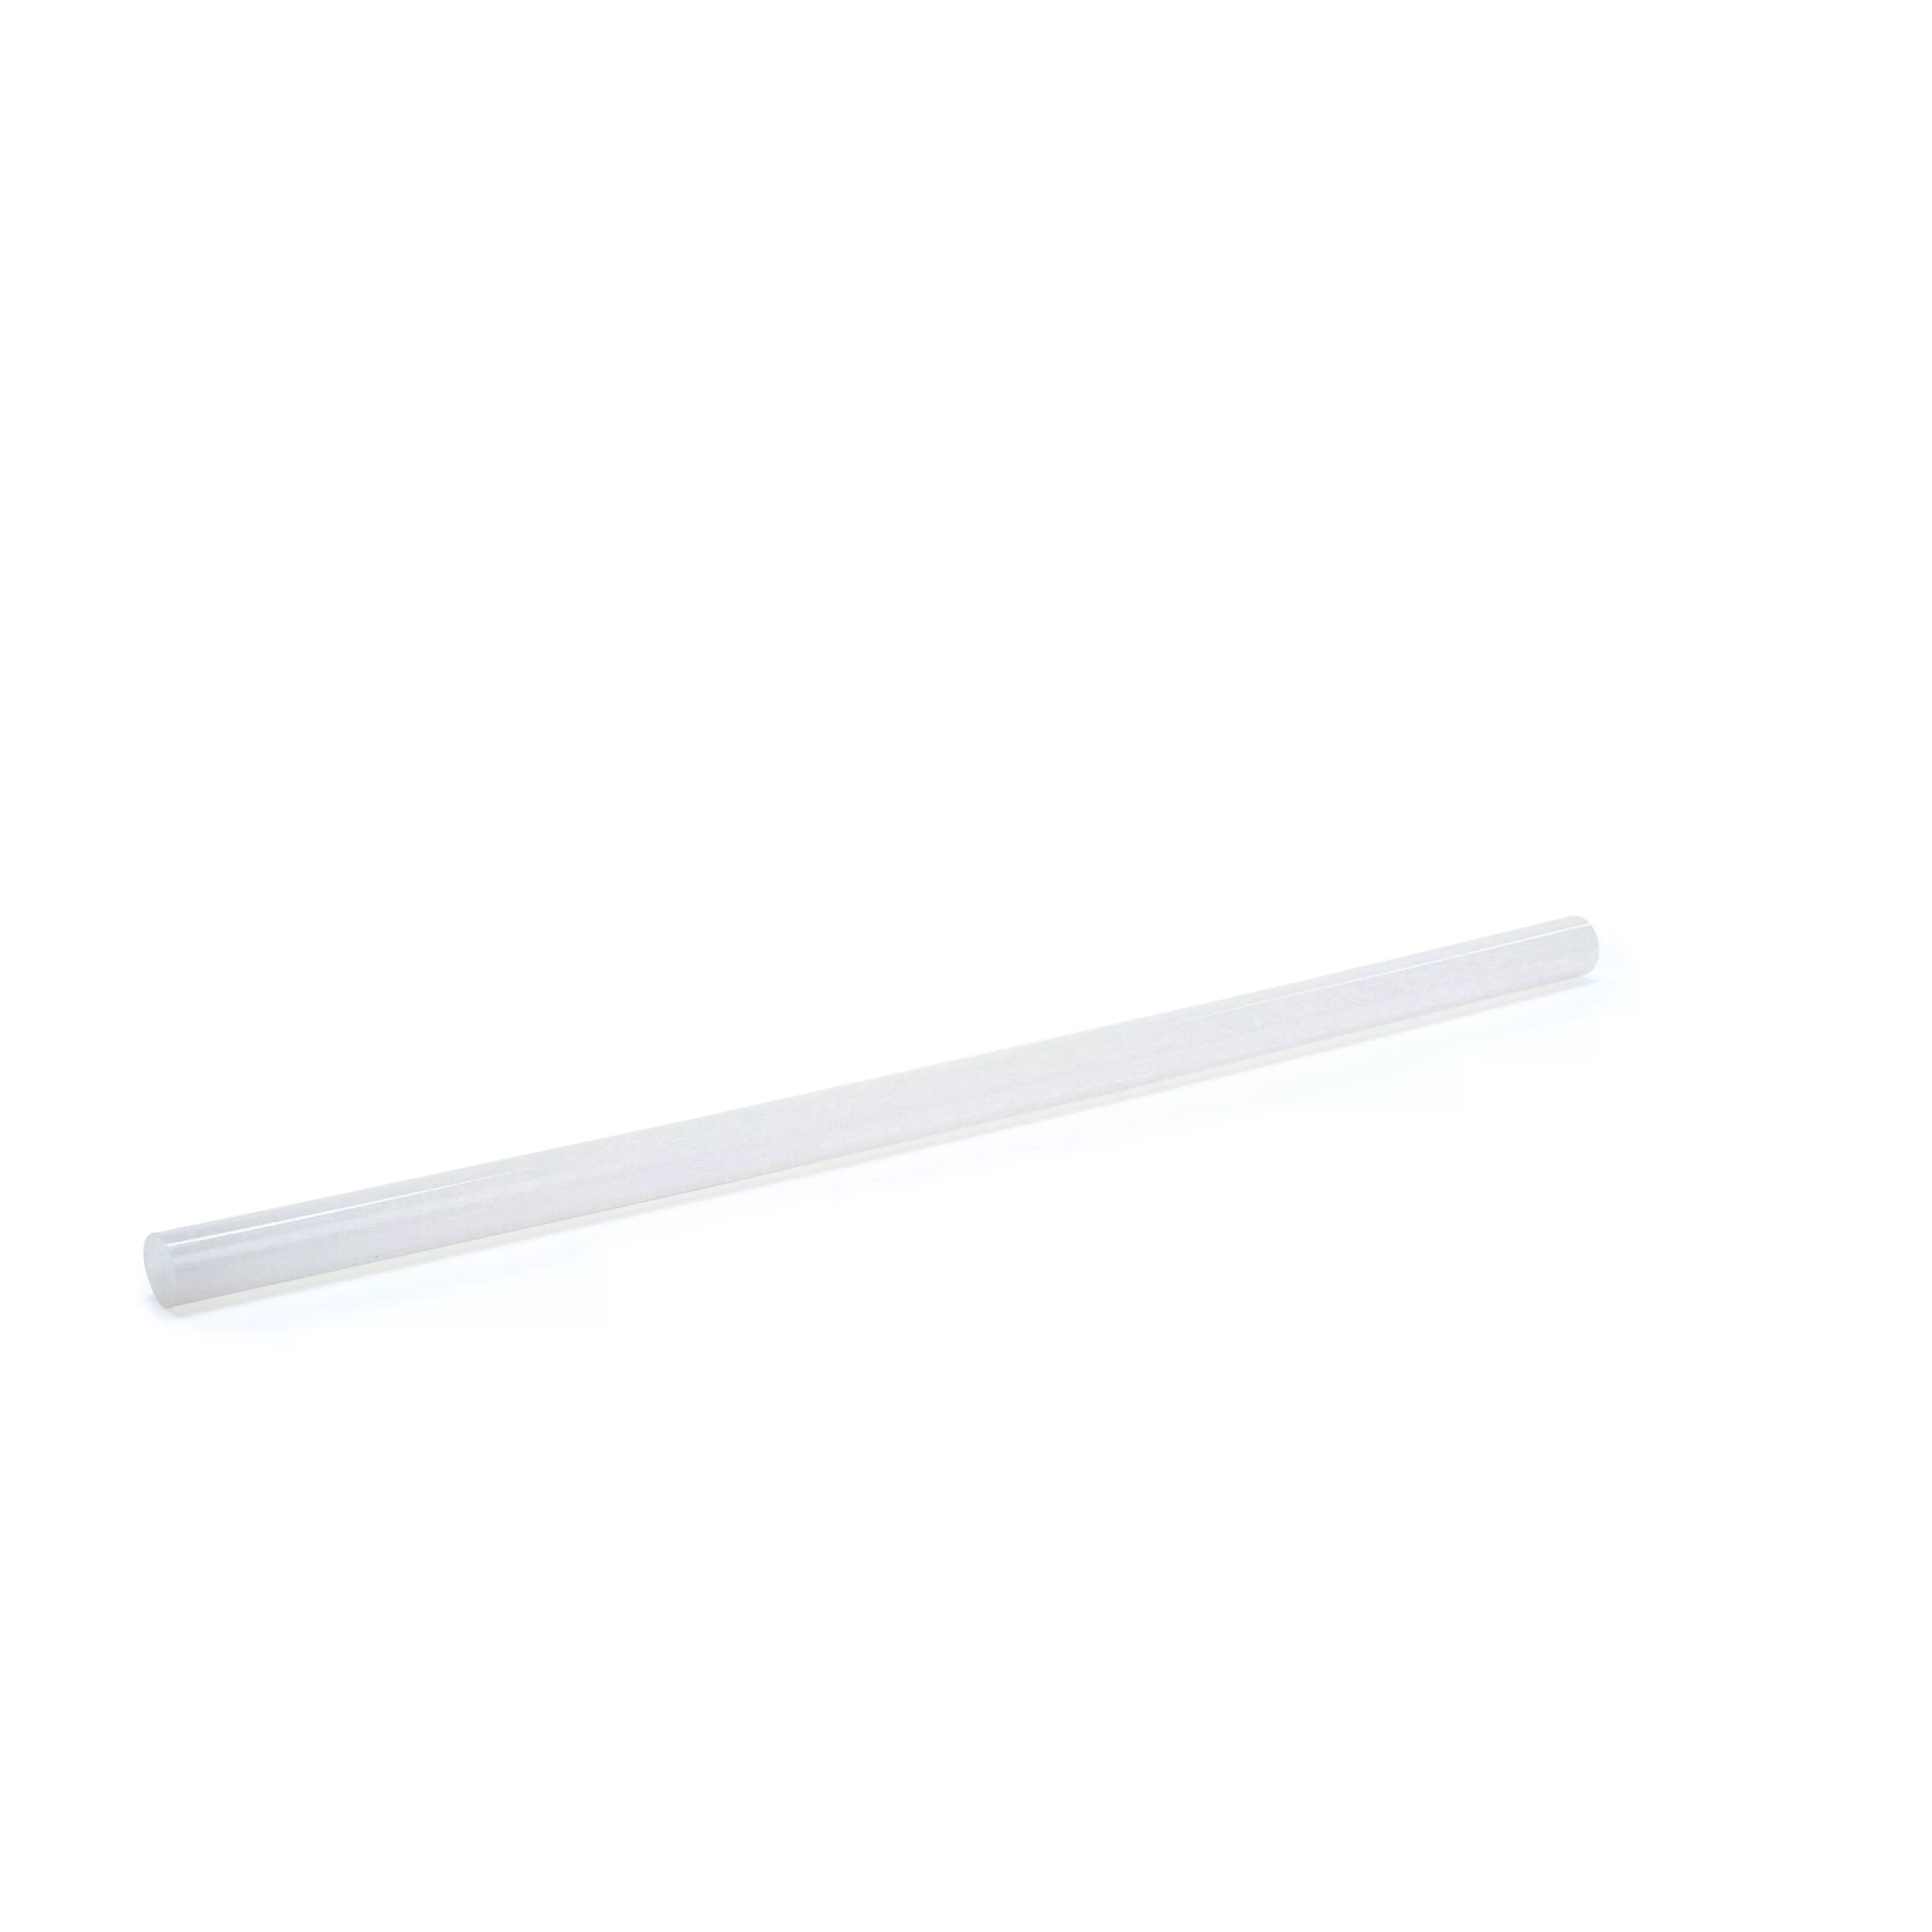 3M™ Hot Melt Adhesive 3792 AE, Clear, 0.45 in x 12 in, 11 lb, Case